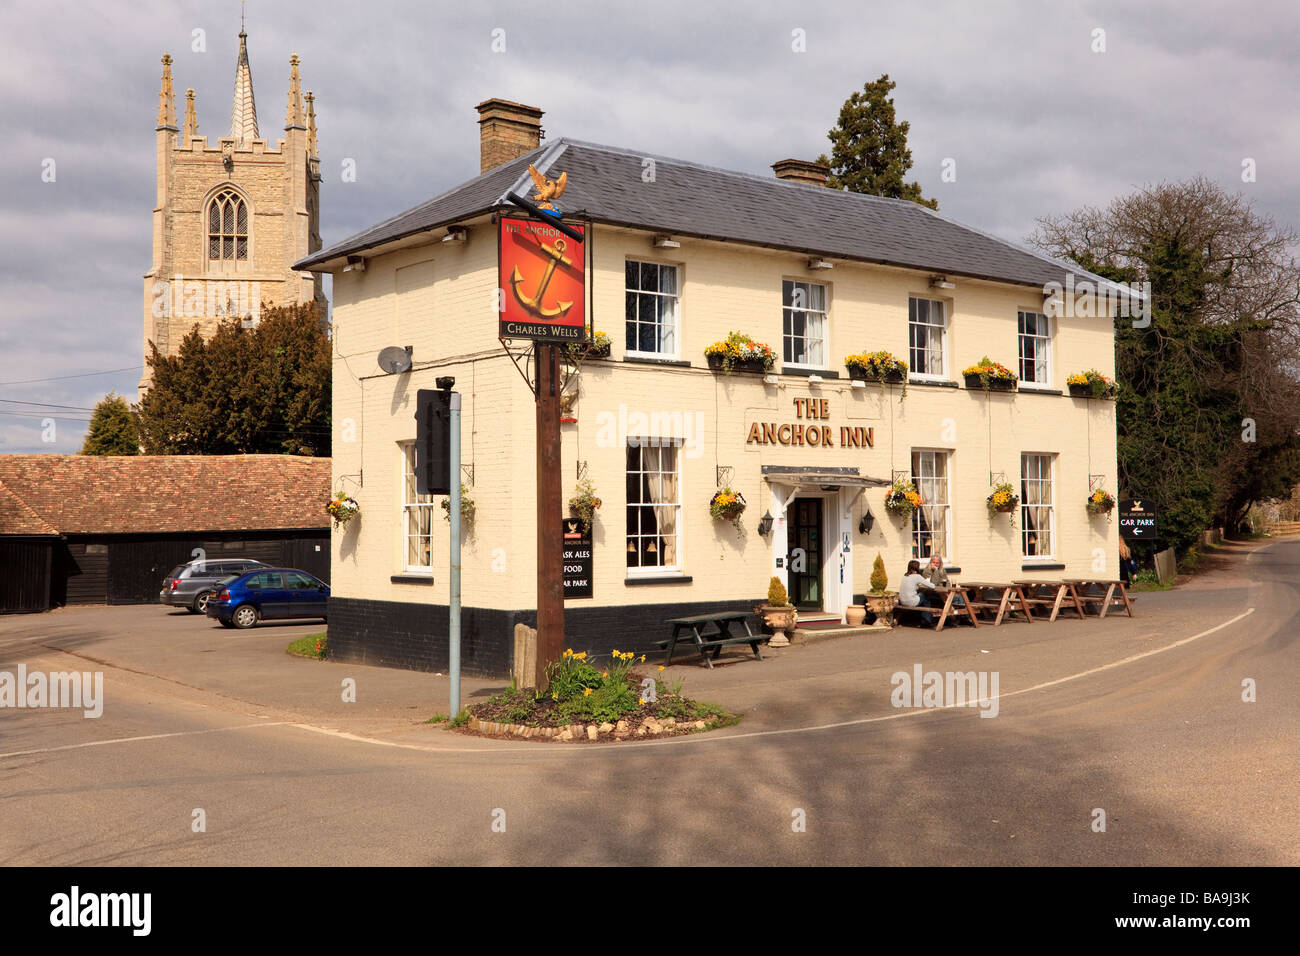 The Anchor Inn, Great Barford, Bedfordshire, Standing on a Road Junction with outside Drinkers Stock Photo